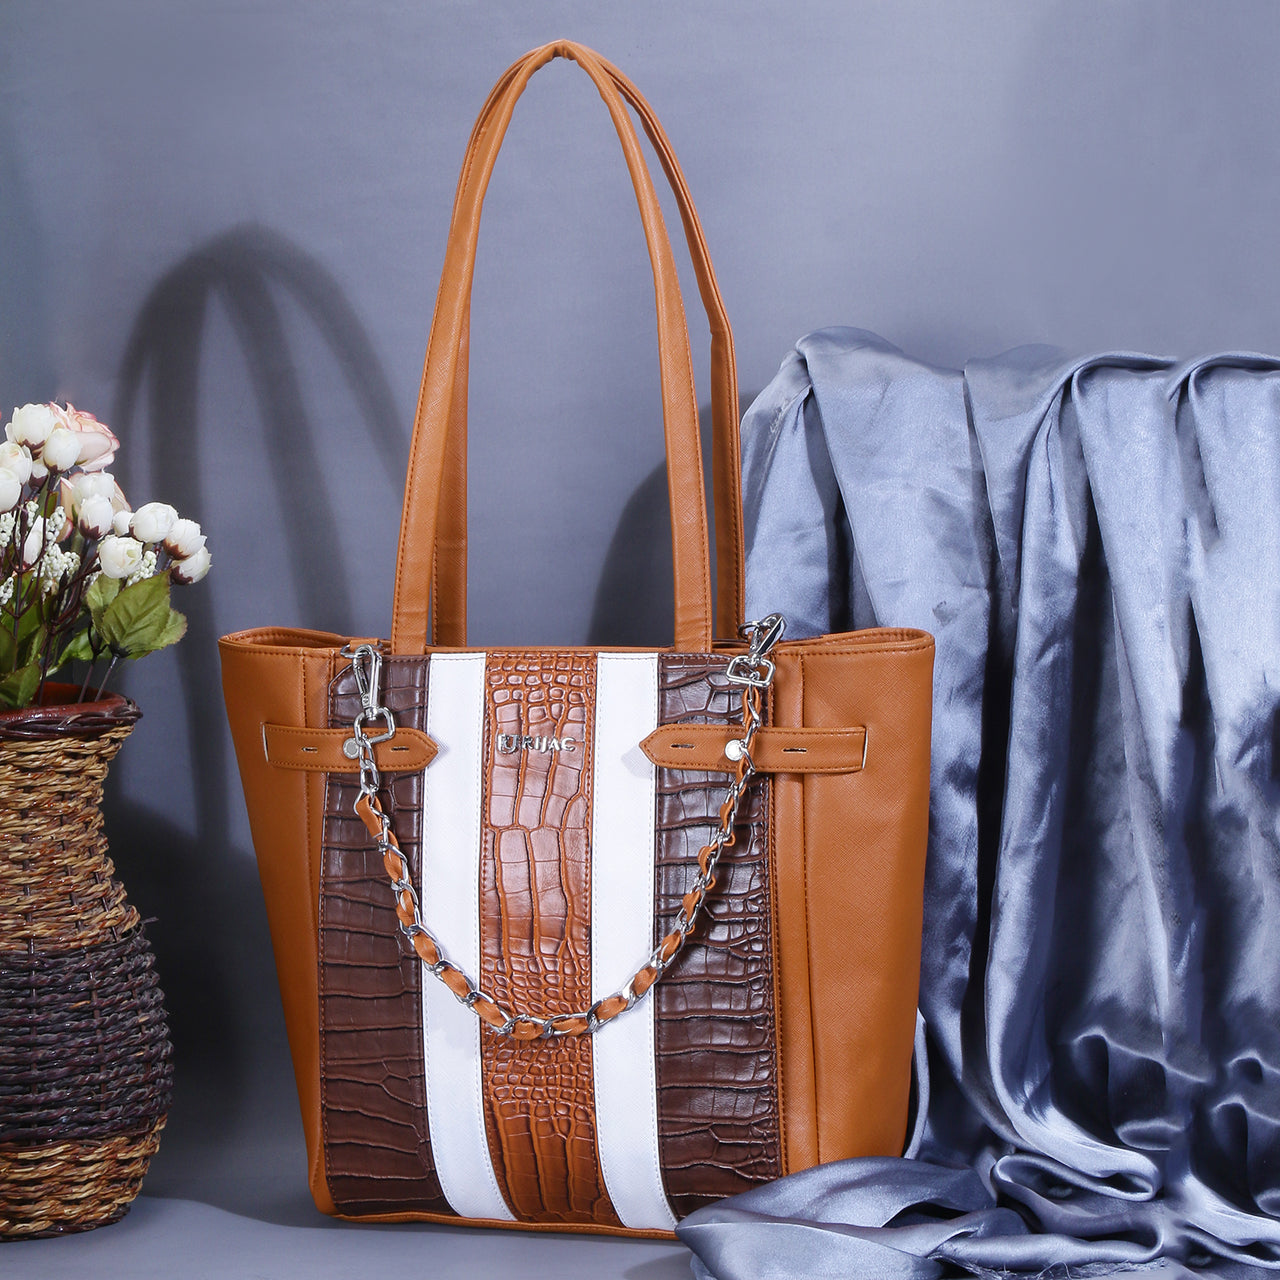 A brown and white tote bag.